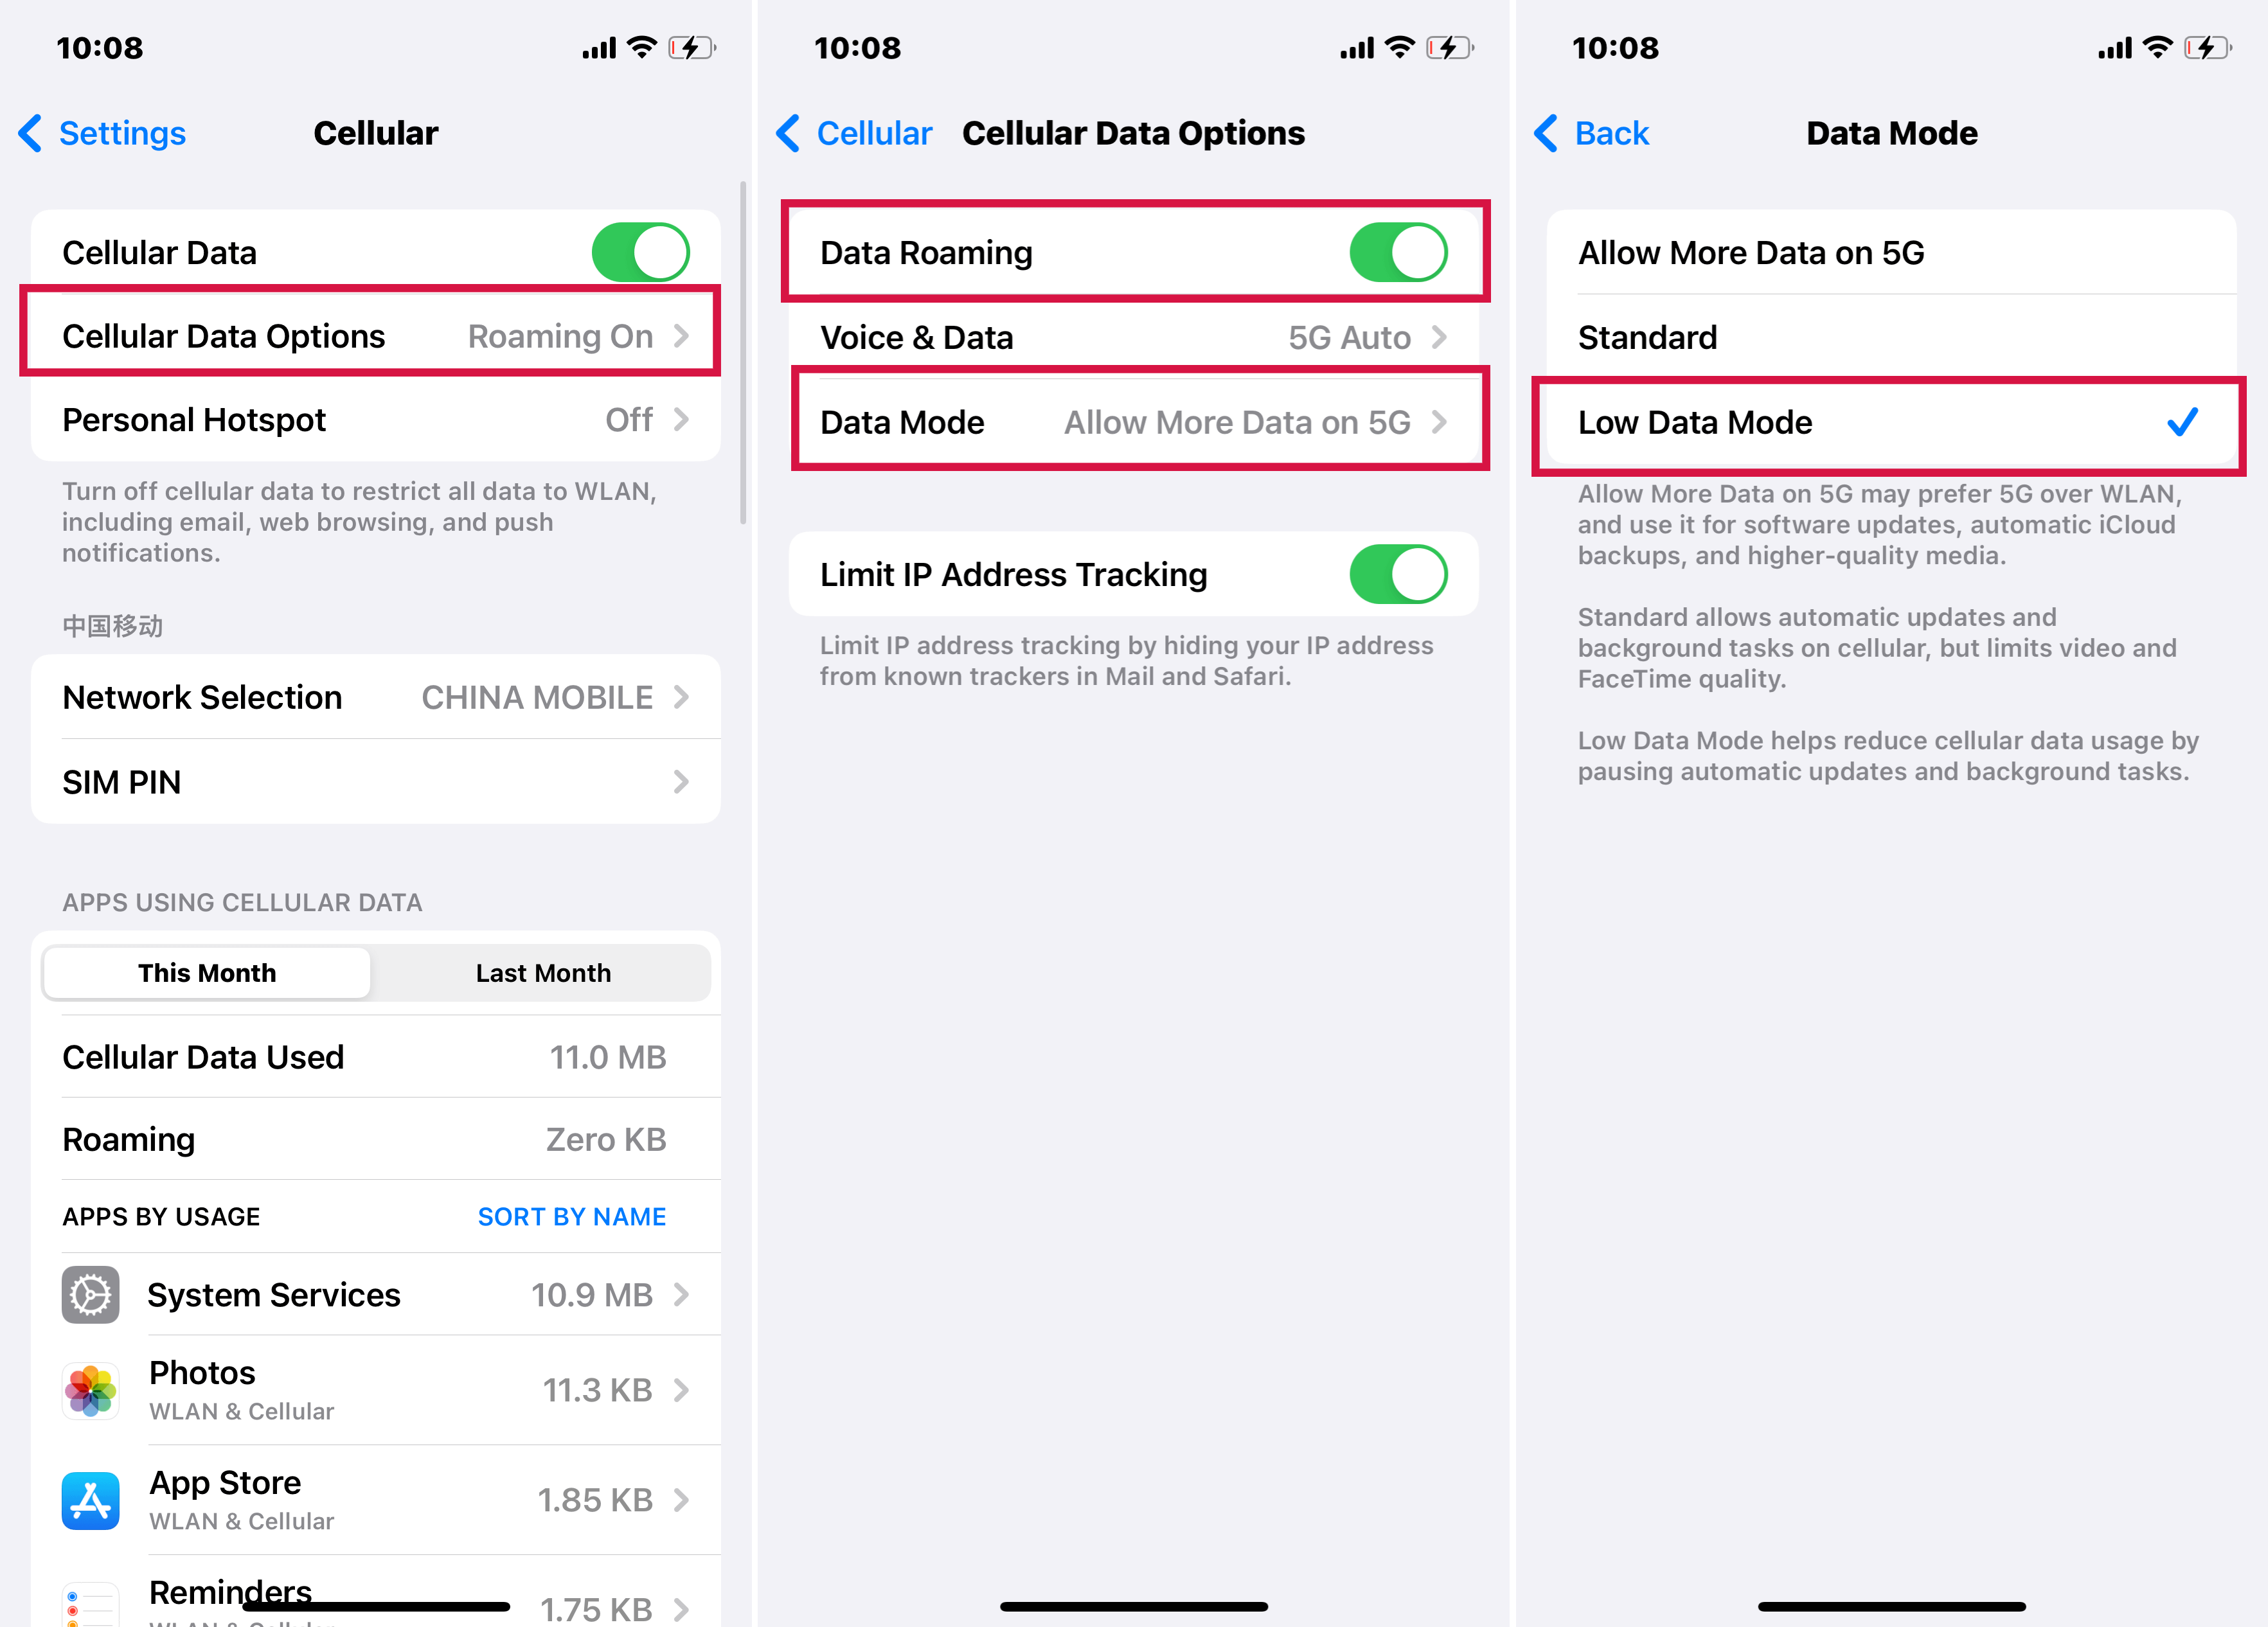 Activate Low Data Mode on iPhone Settings